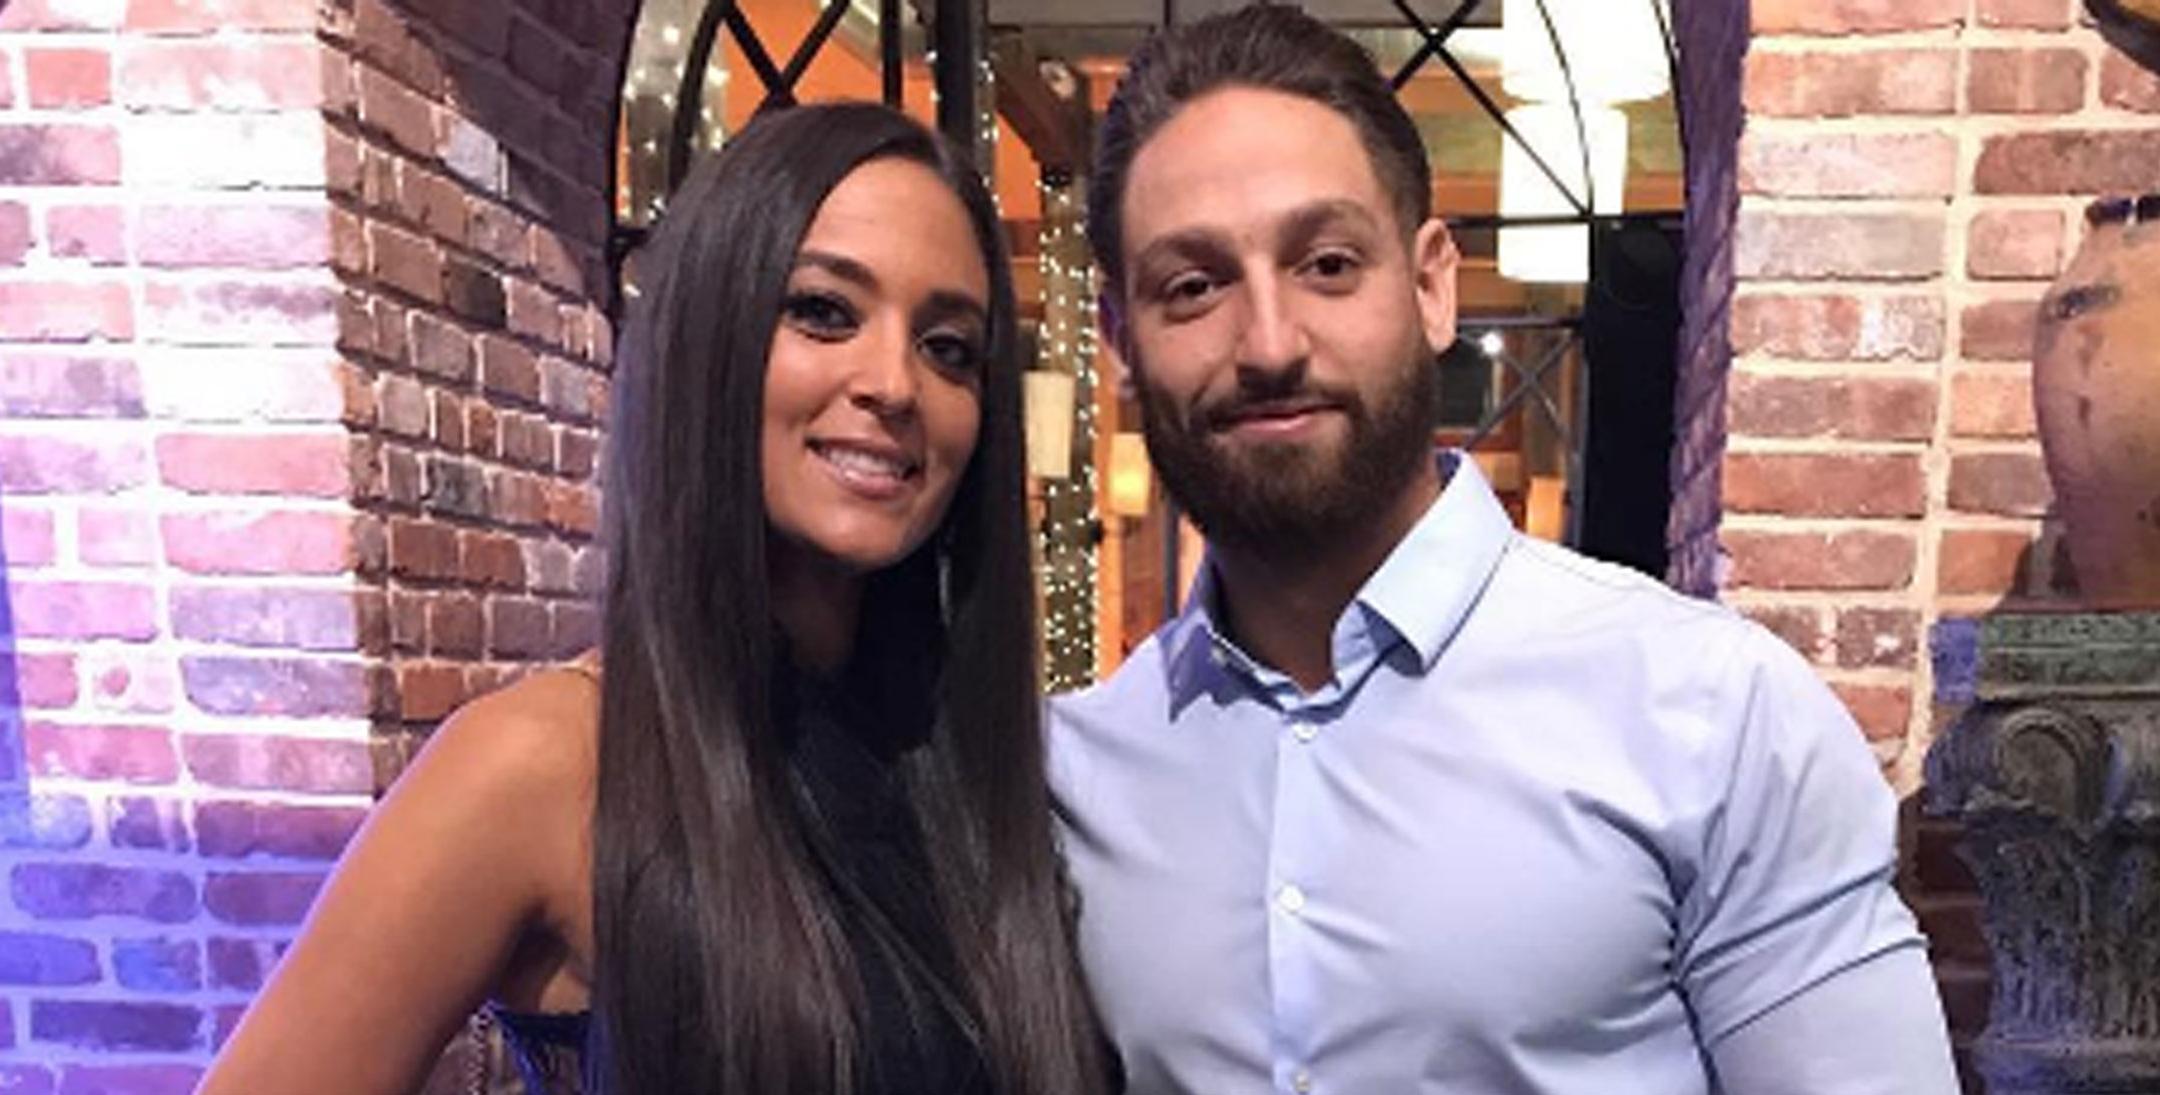 Are Sammi 'Sweetheart' & Boyfriend Getting Married? Snooki Says Yes!